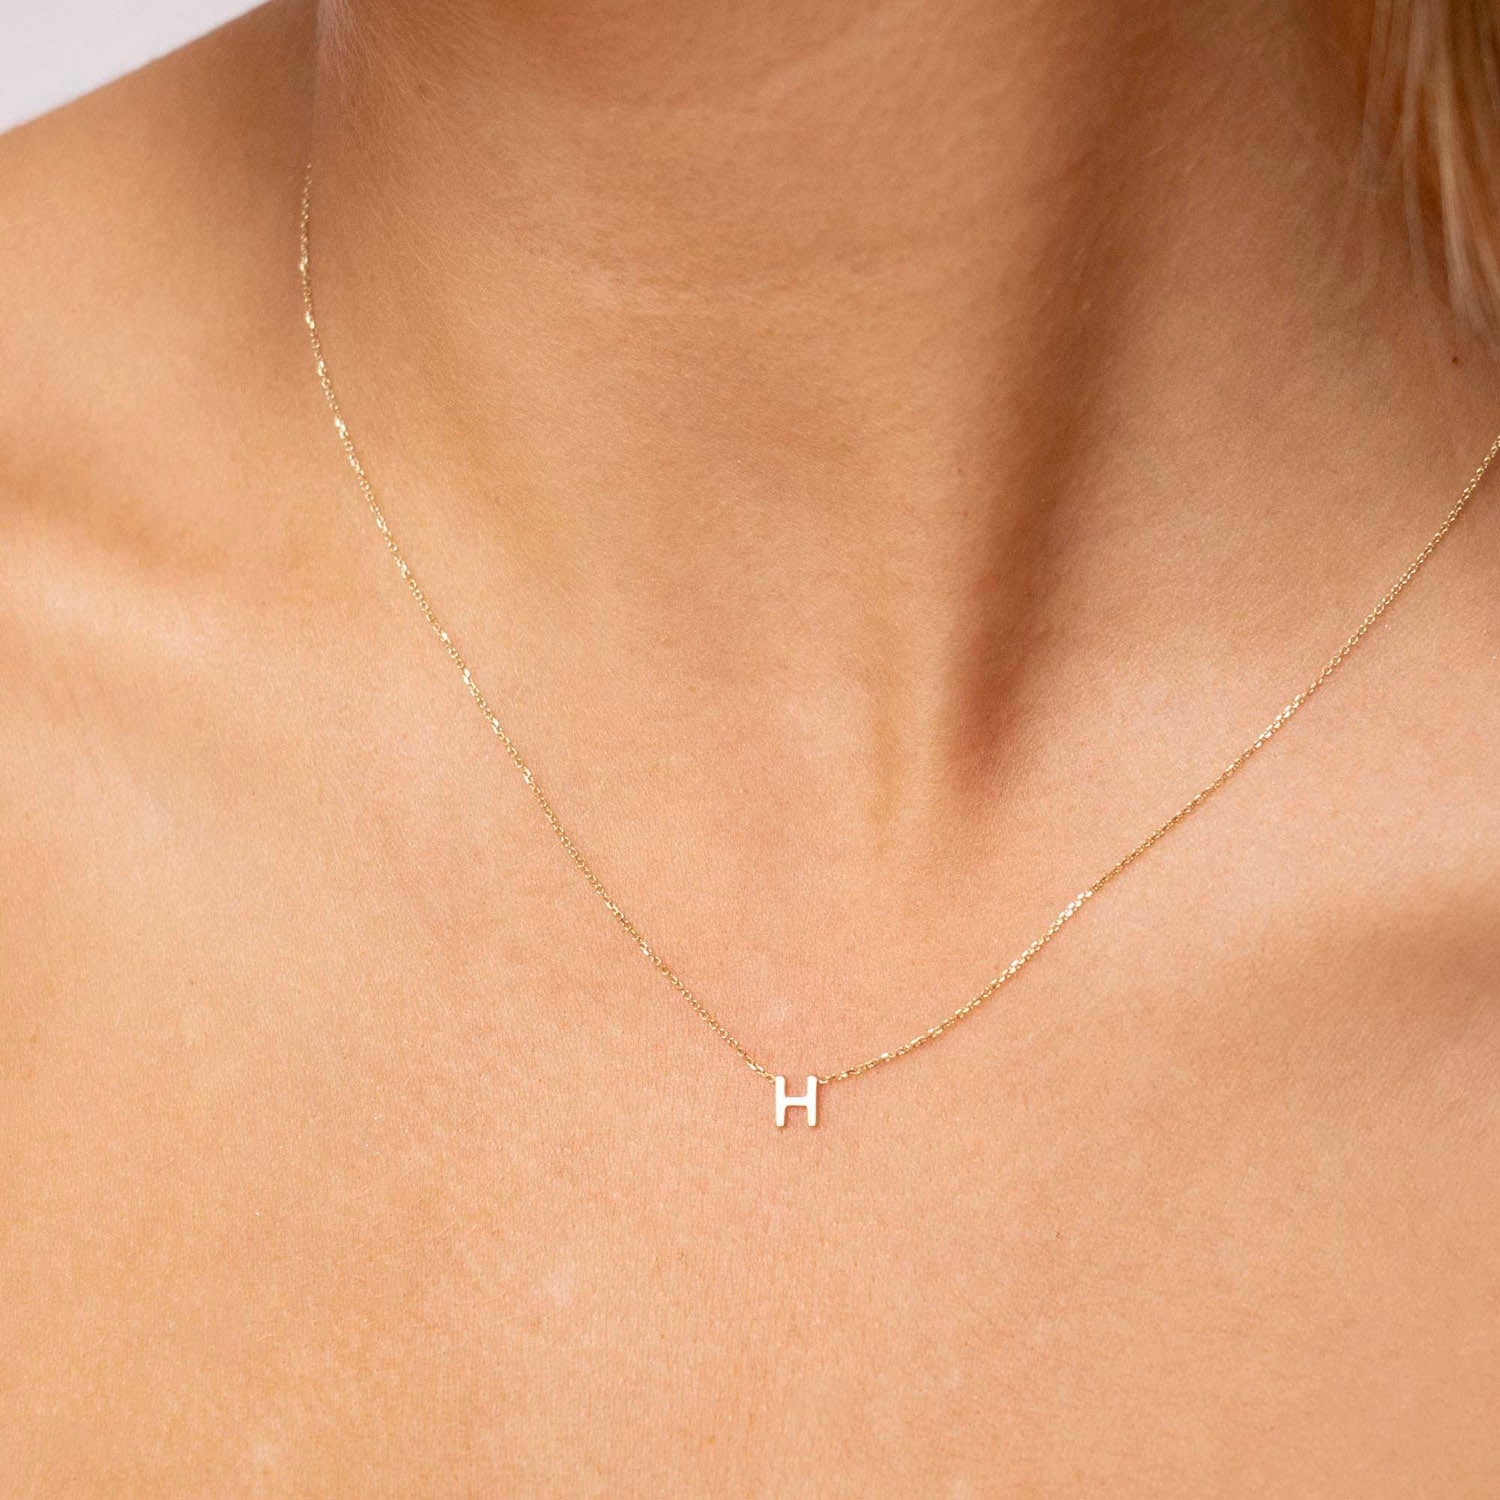 H Letter Initial Alphabet Name Personalized 925 Silver Necklace, 15” +  Extender | eBay